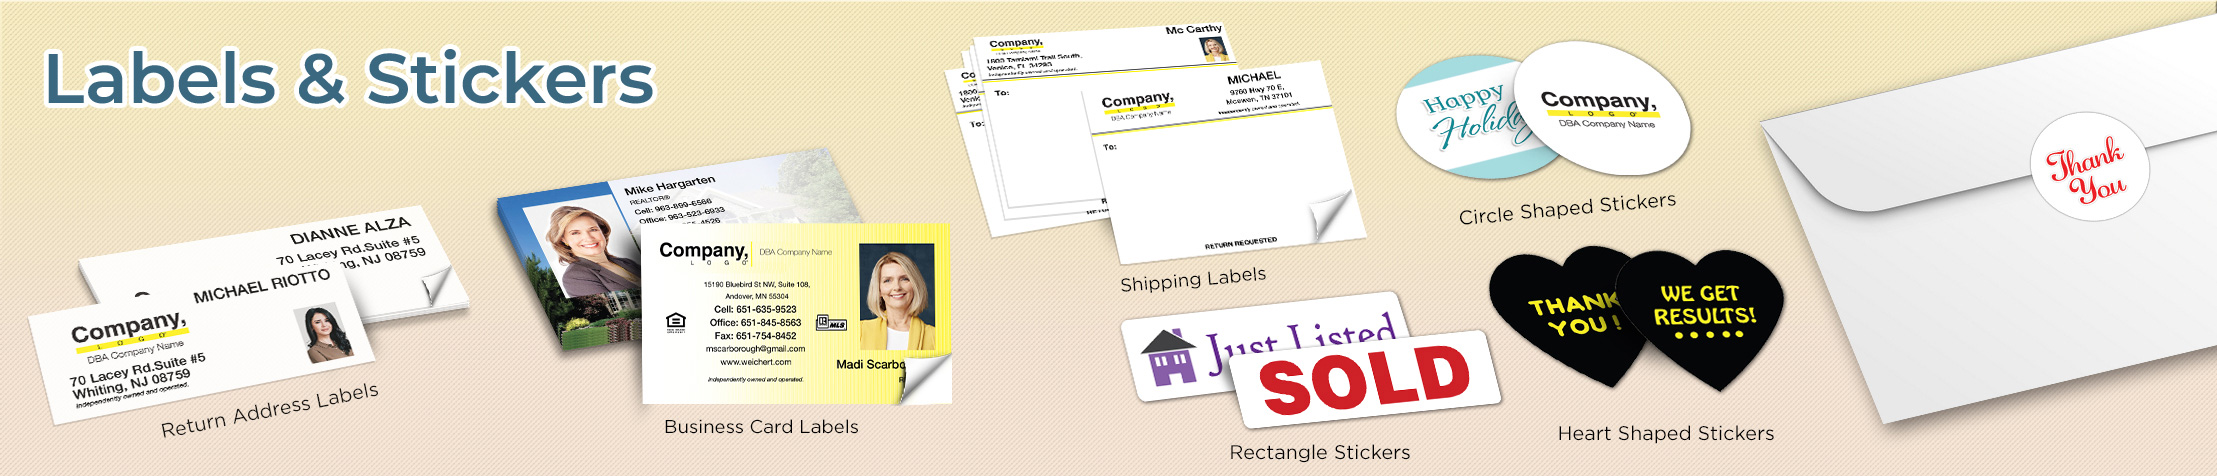 Weichert Real Estate Labels and Stickers - Weichert  business card labels, return address labels, shipping labels, and assorted stickers | BestPrintBuy.com